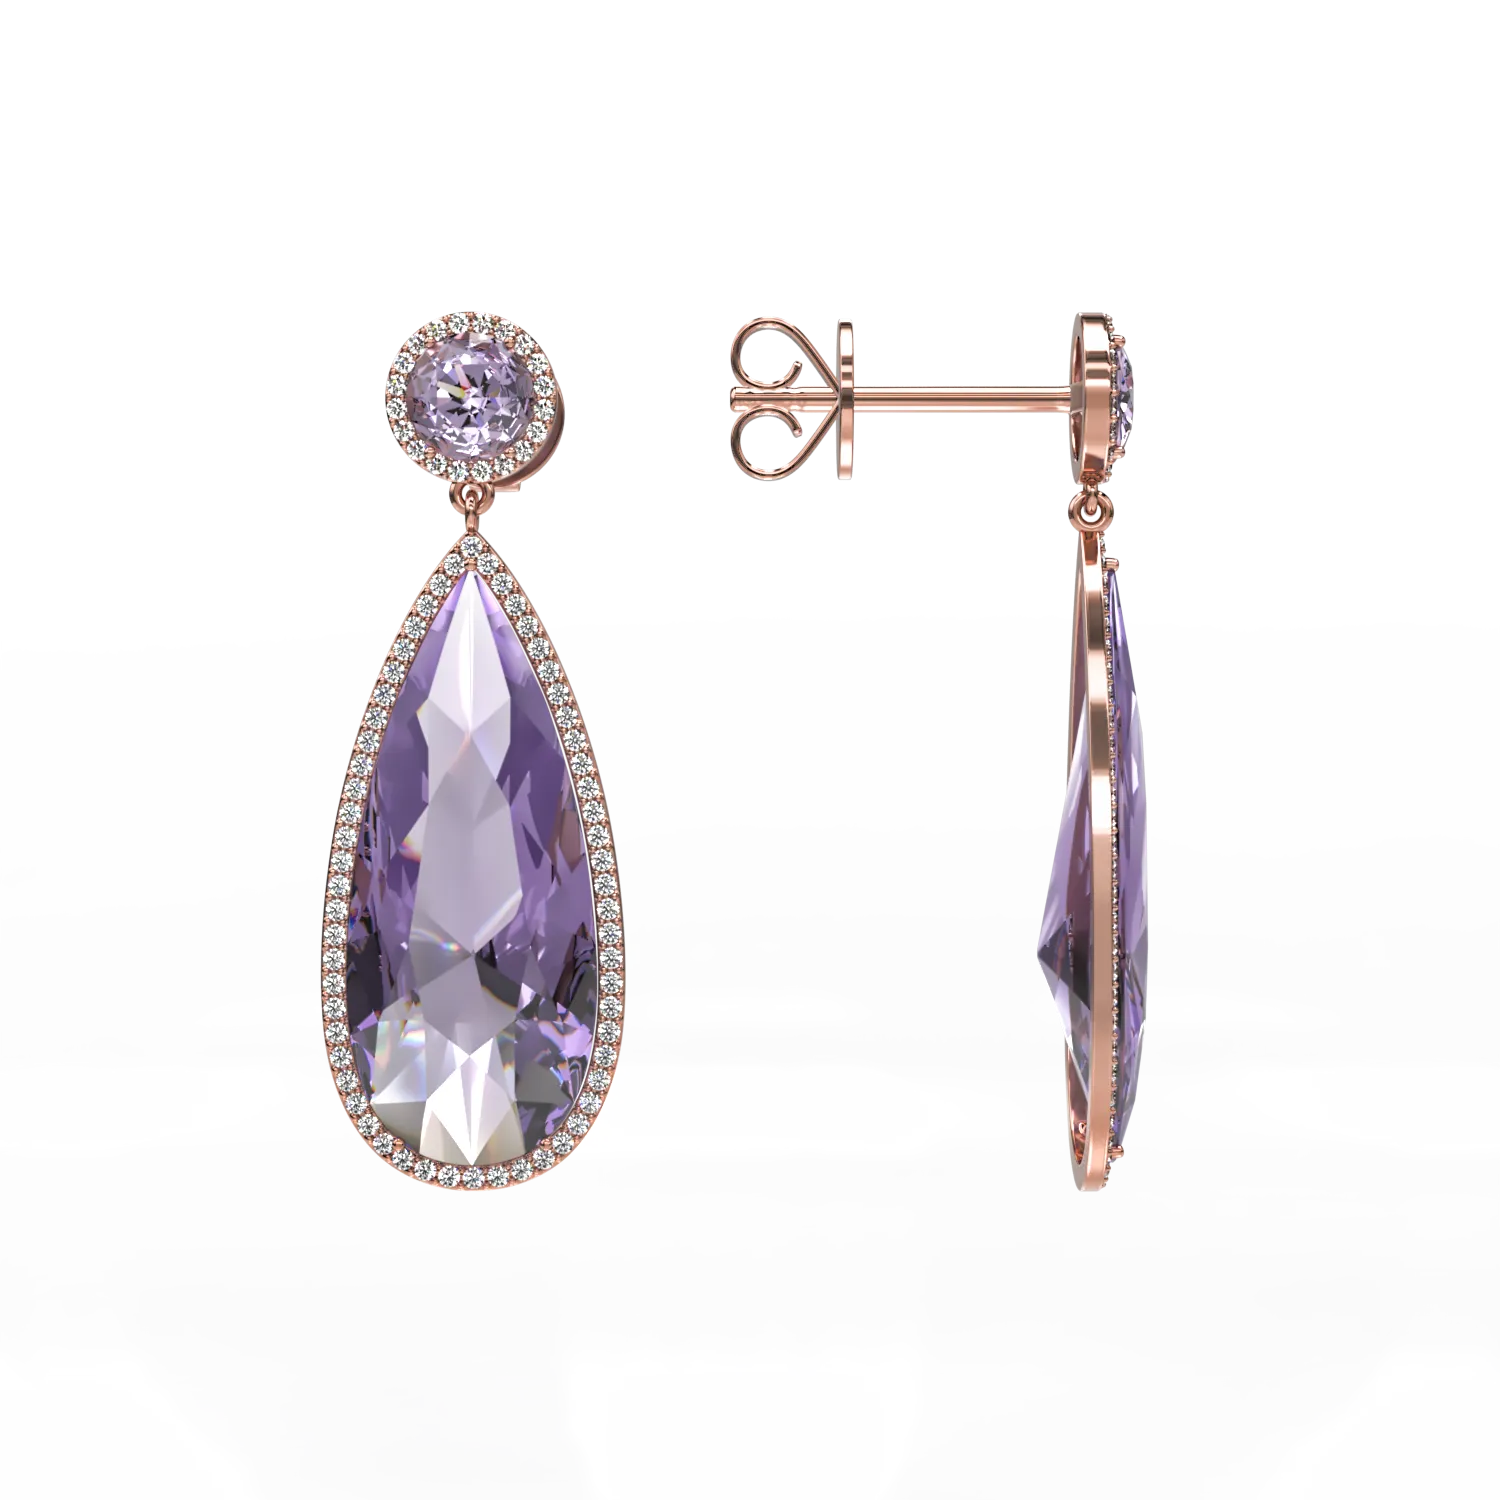 14K rose gold earrings with amethysts of 13.85ct and diamonds of 0.571ct.